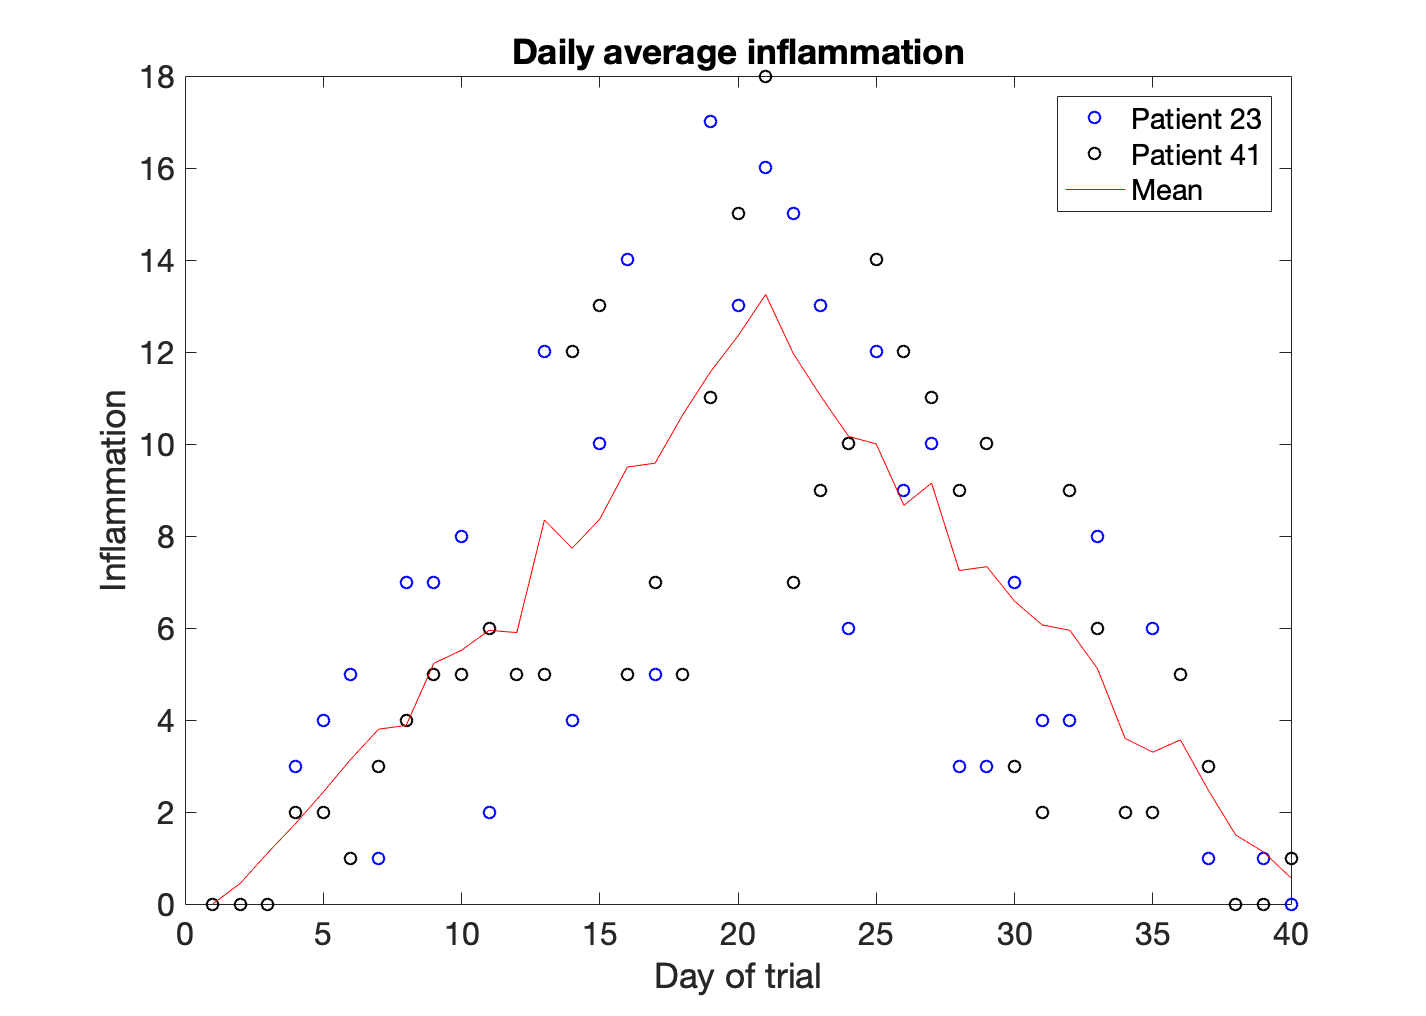 Comparison of patient data and mean with legend